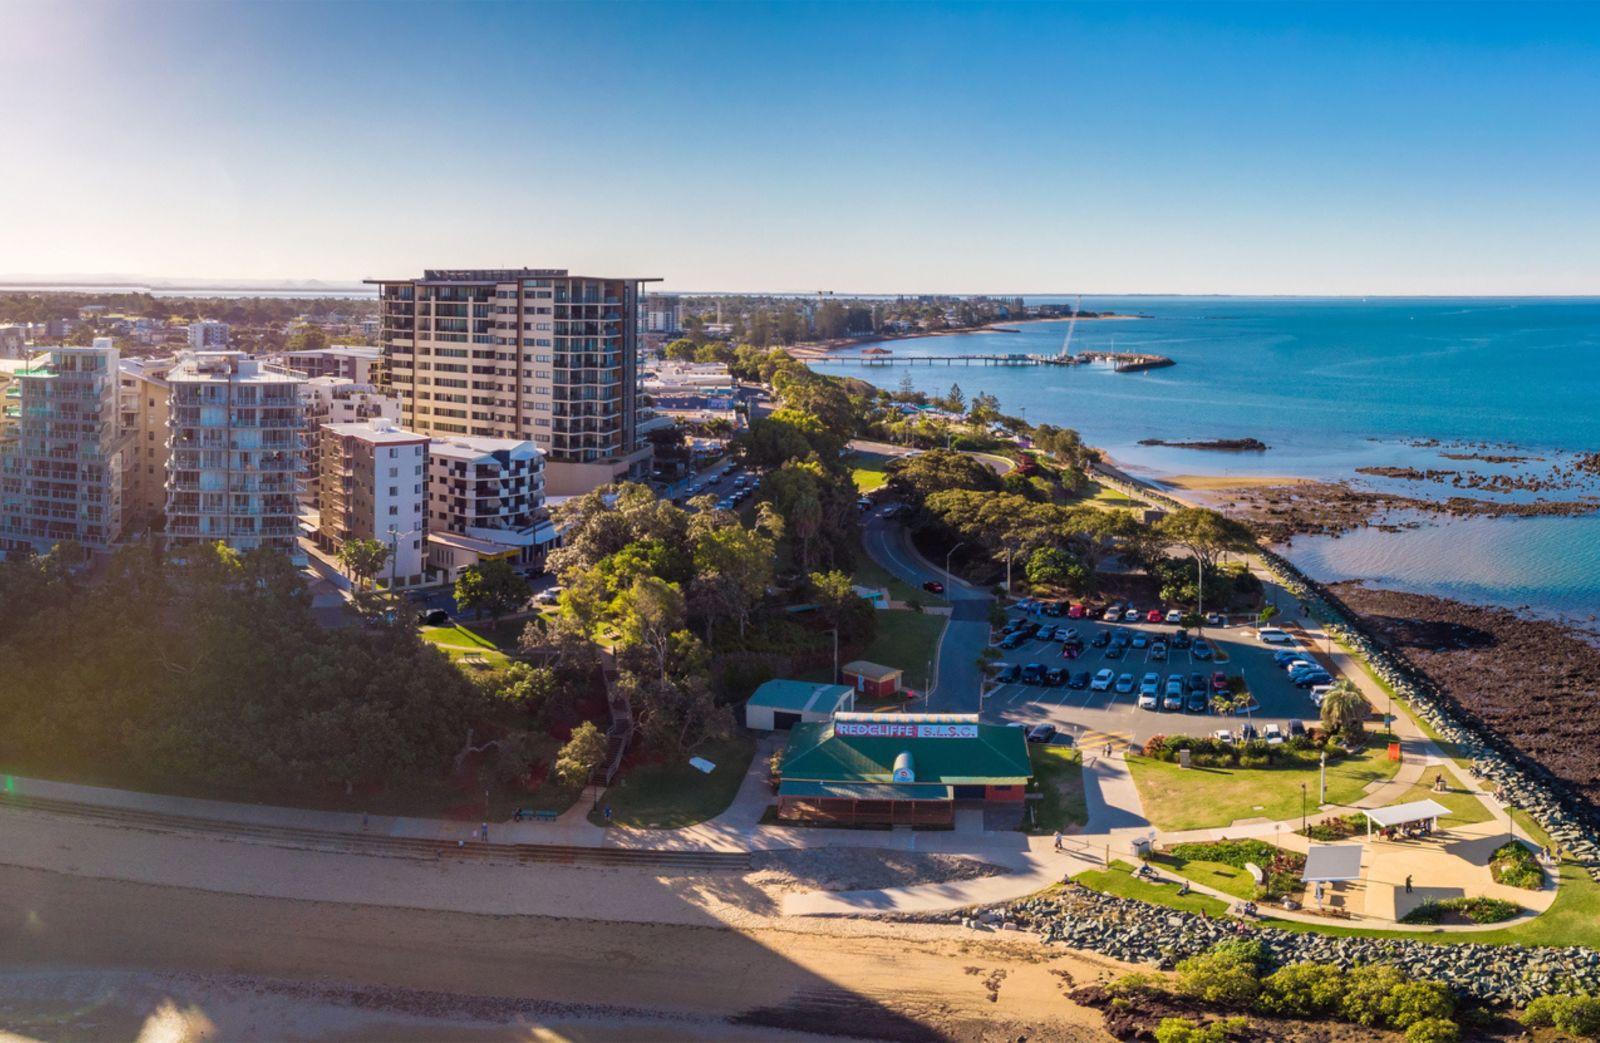 City of Moreton Bay is pursuing a polycentric city format with multiple hubs across the region, with significant population growth mooted for the area. 